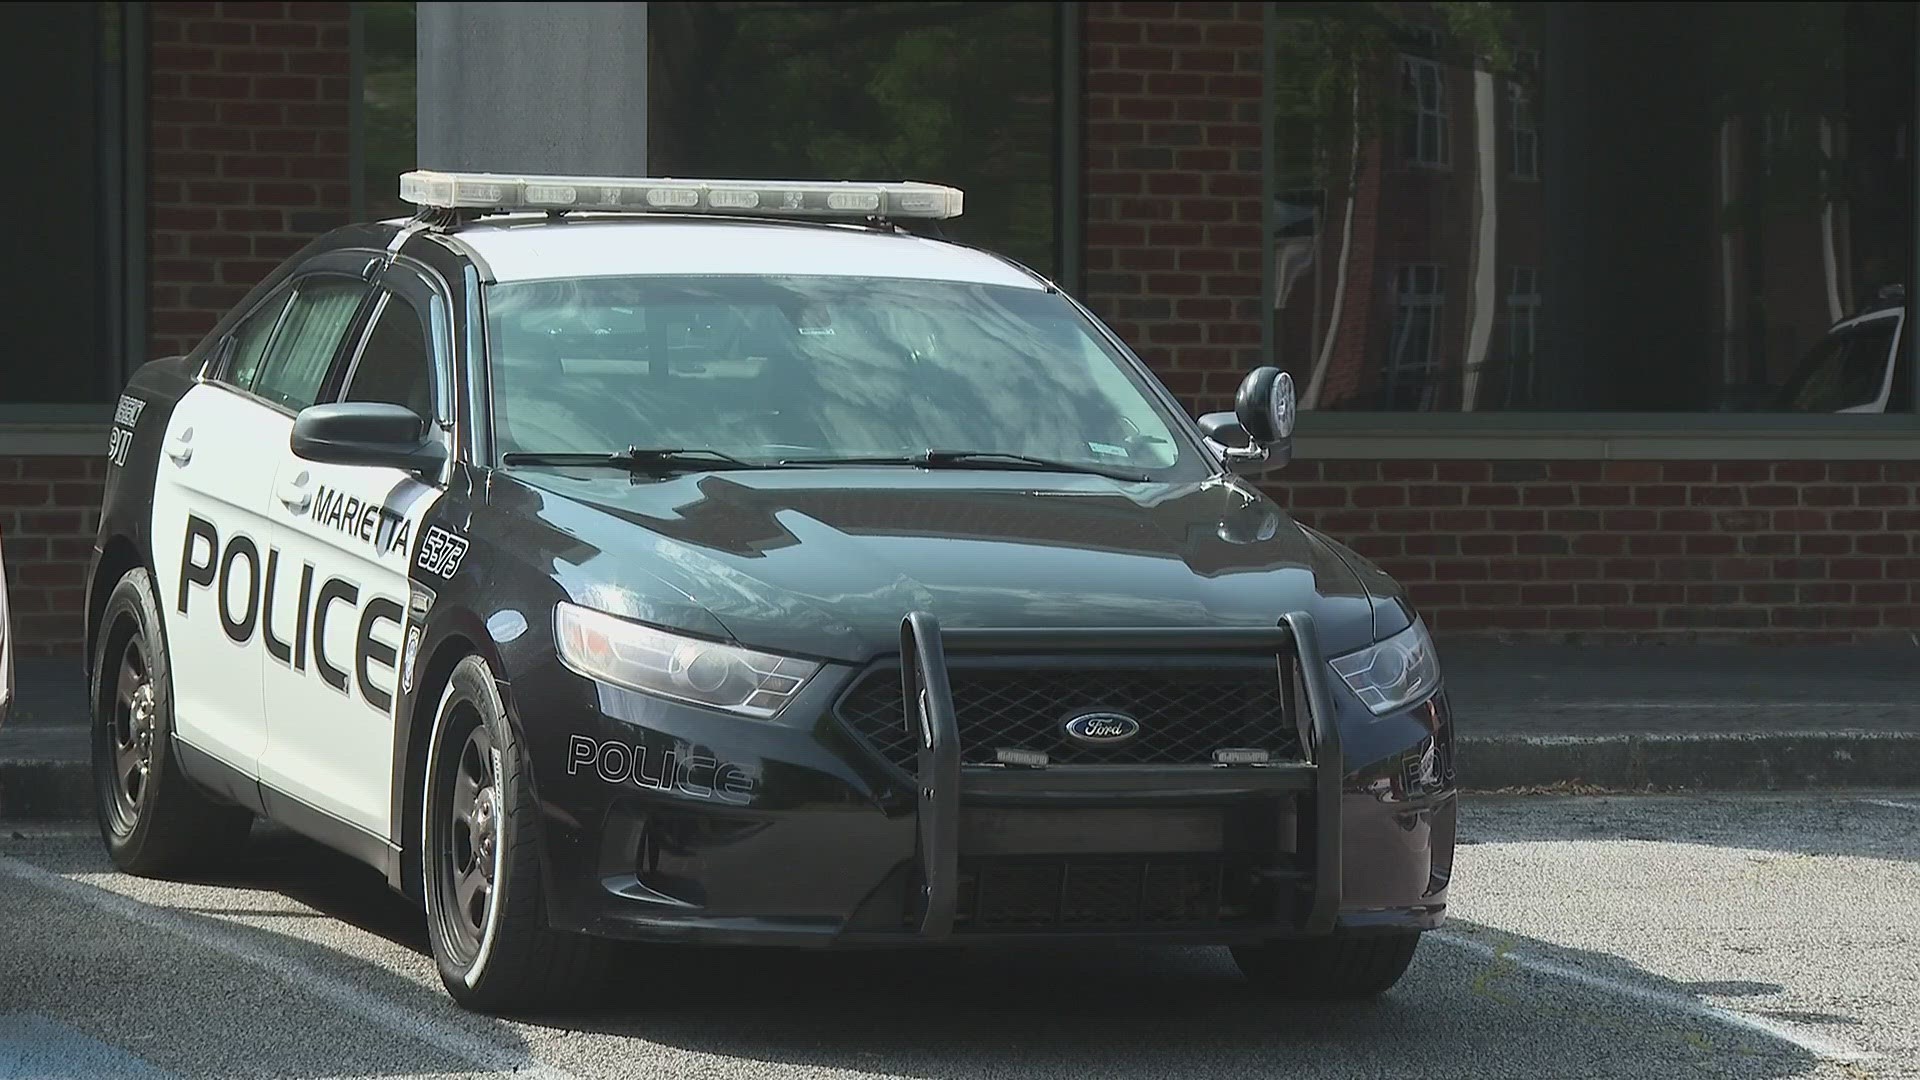 Thieves are targeting unlocked cars by "flipping" the doorhandles.